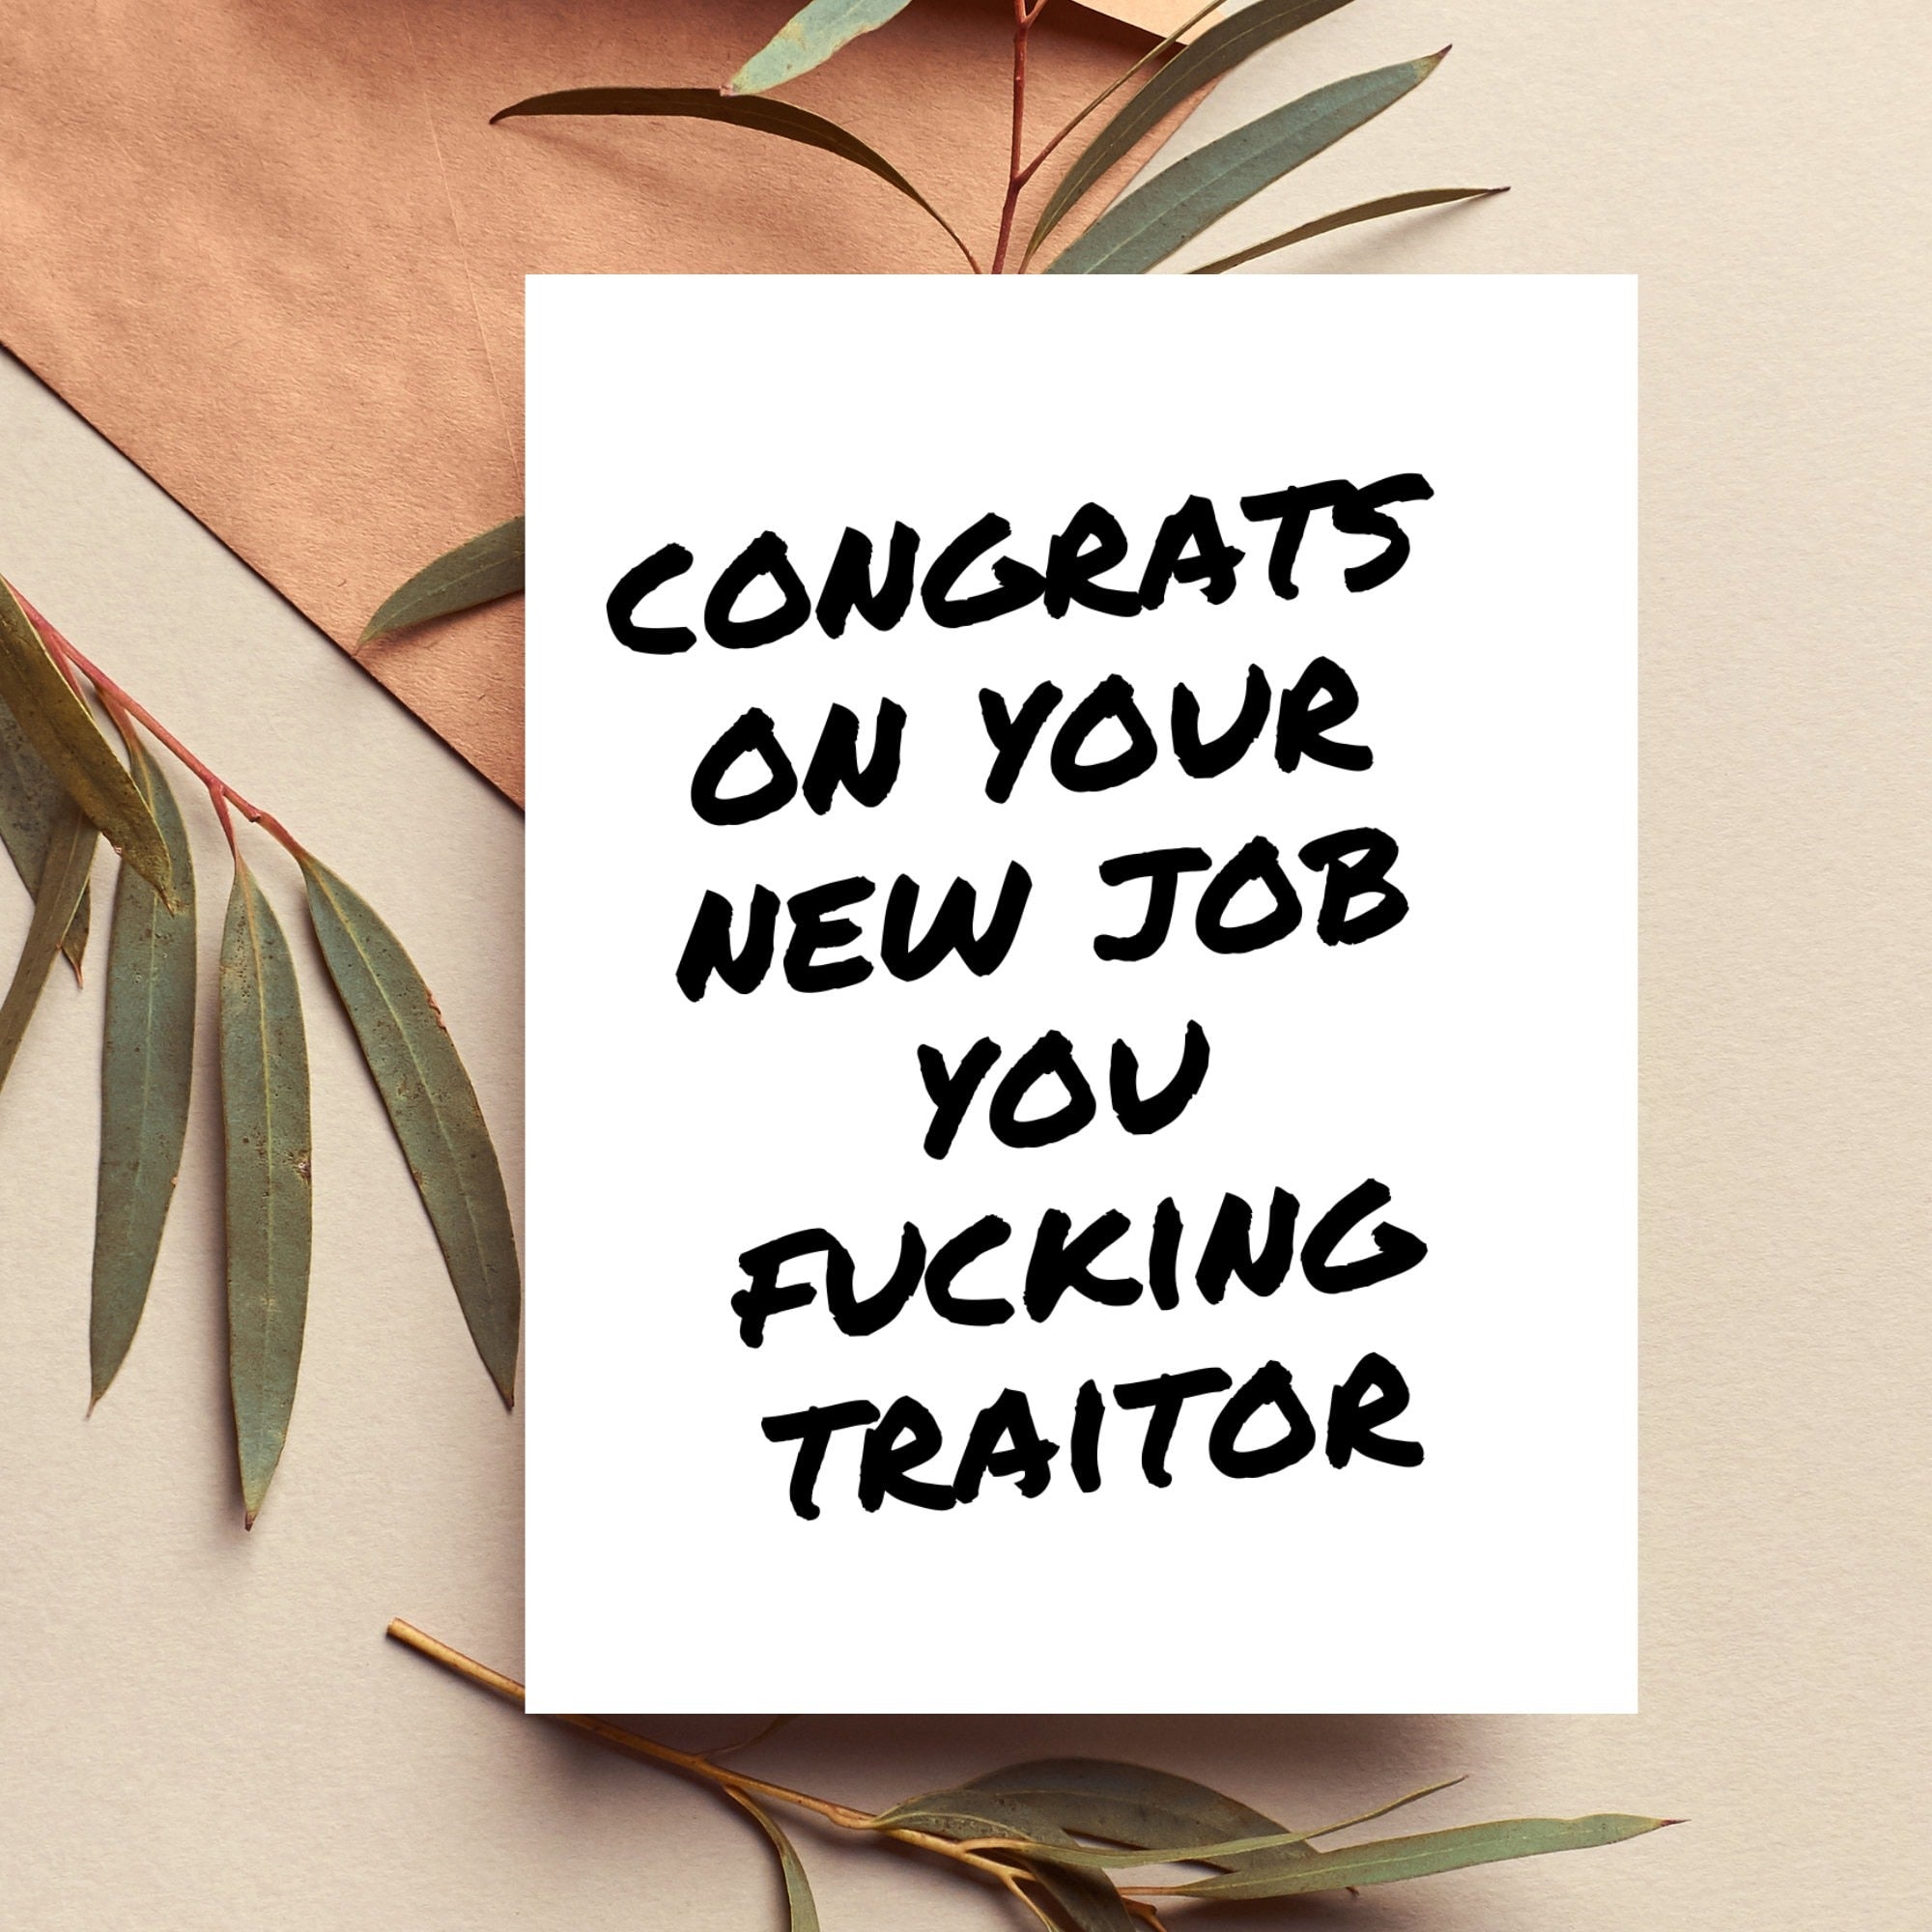 Congrats On Your New Job You Fucking Traitor Card